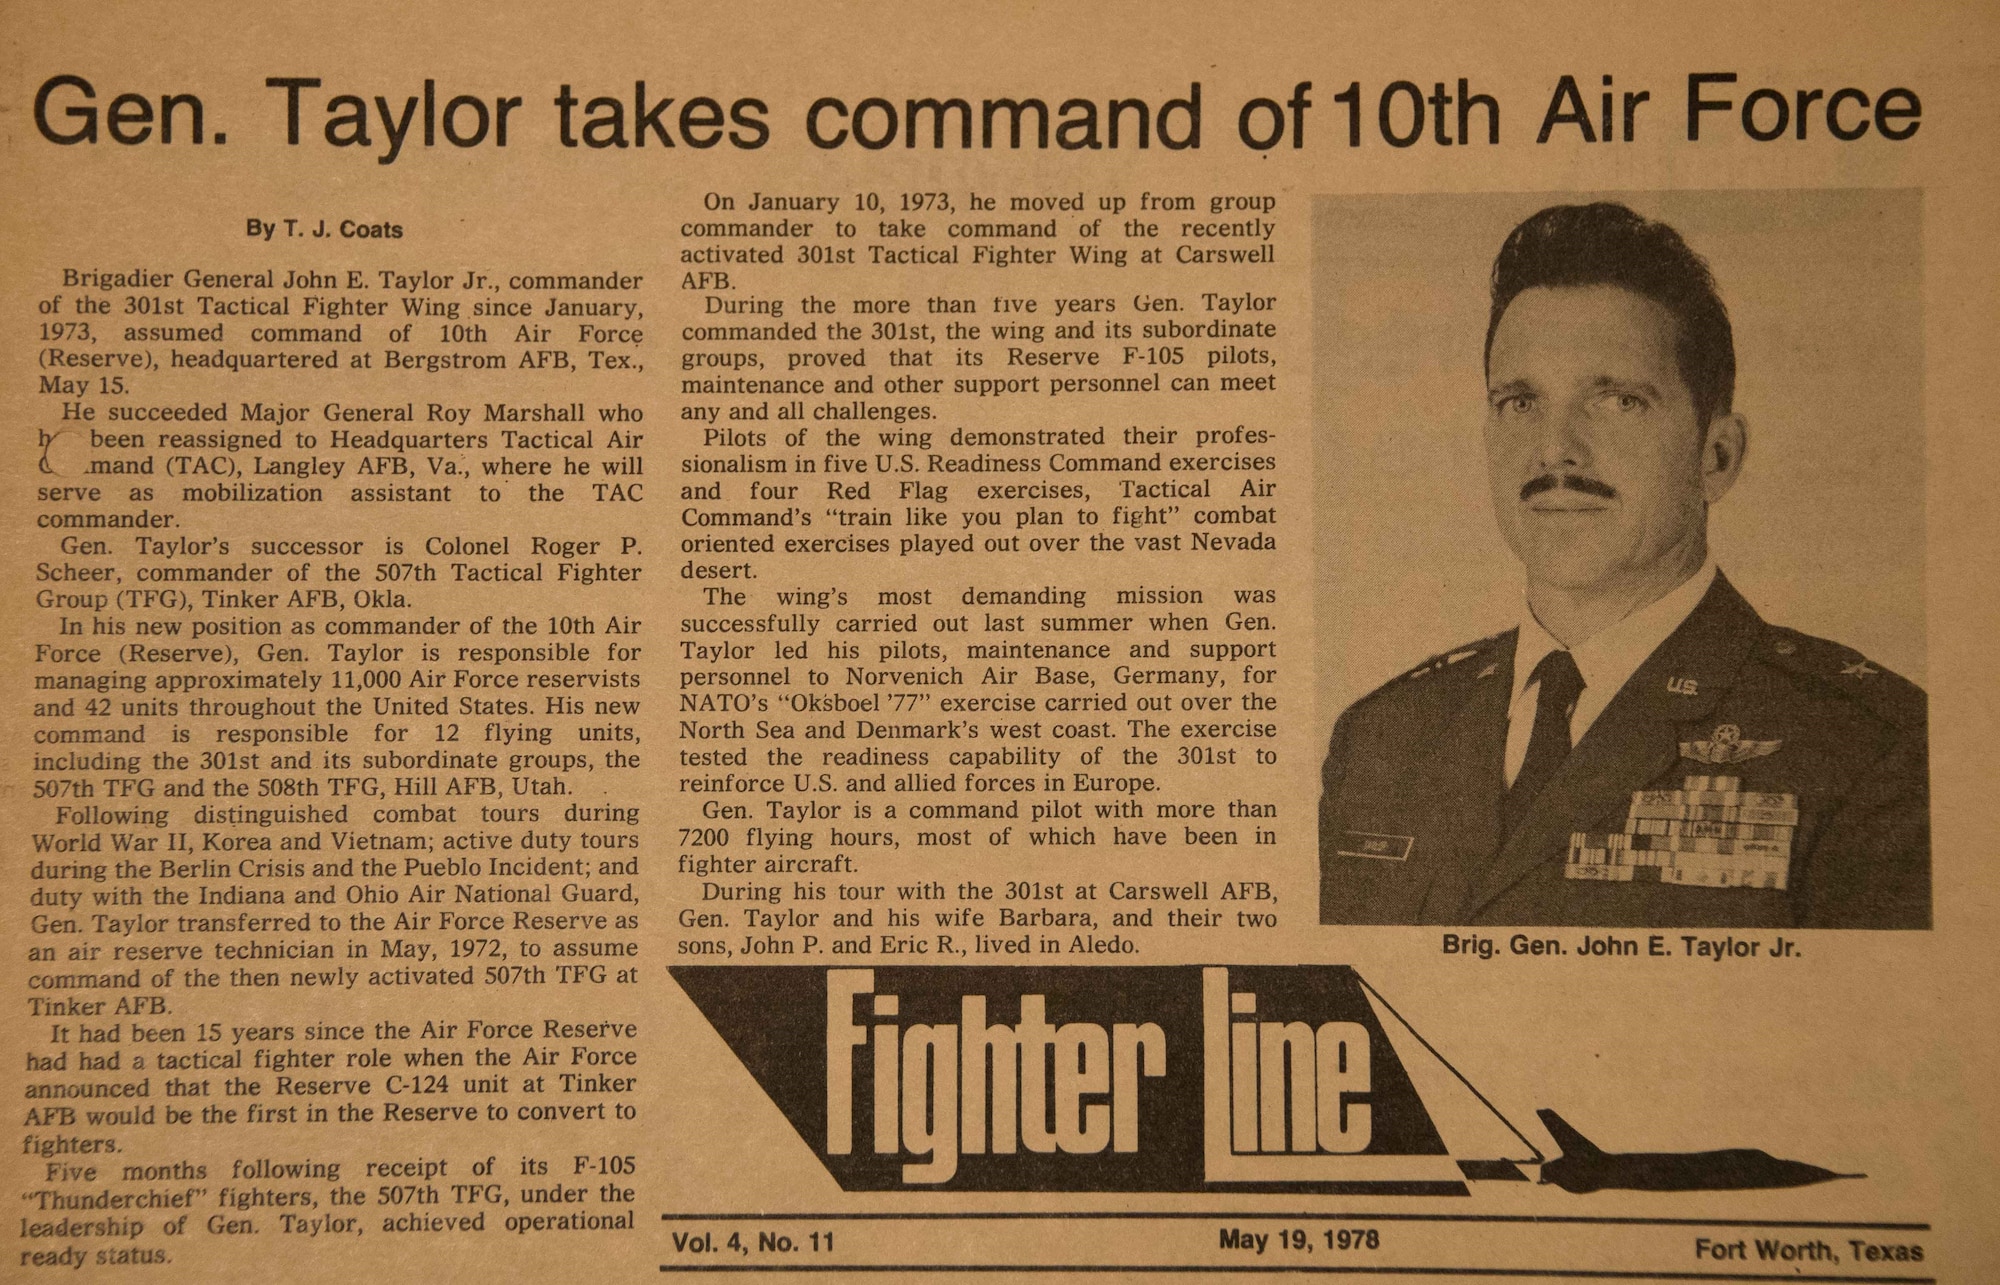 Brigadier General John E. Taylor Jr., commander of the 301st Tactical Fighter Wing since January 1973, assumed command of 10th Air Force, headquartered at Bergstrom Air Force Base, Texas on May 15, 1978. The Fighter Line is the wing's publication highlighting Airmen, personnel and all things pertaining to the 301st.(